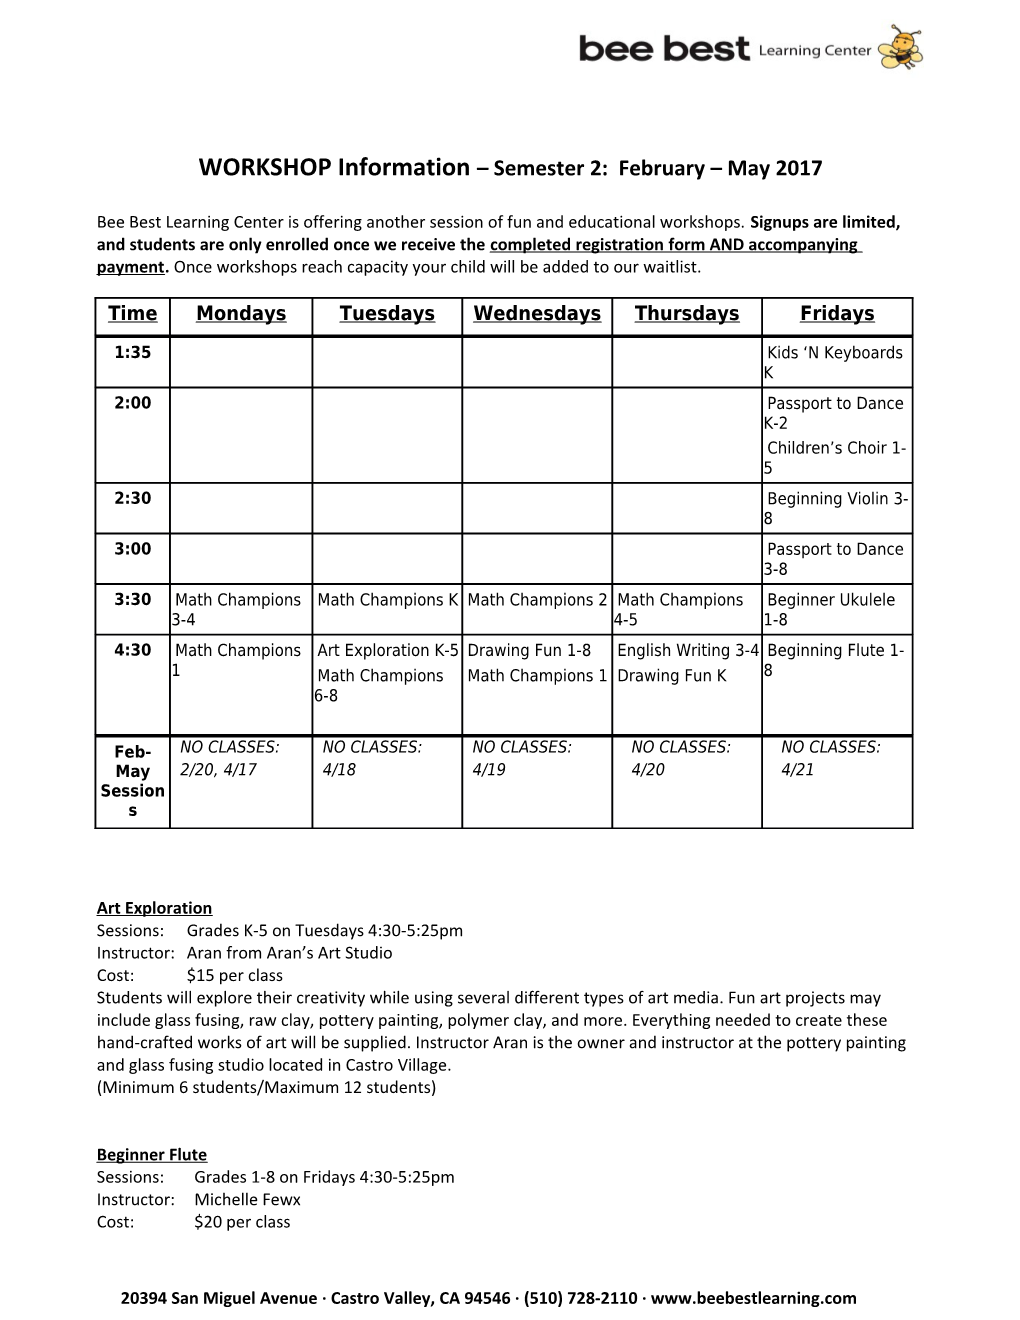 WORKSHOP Information Semester 2: February May 2017